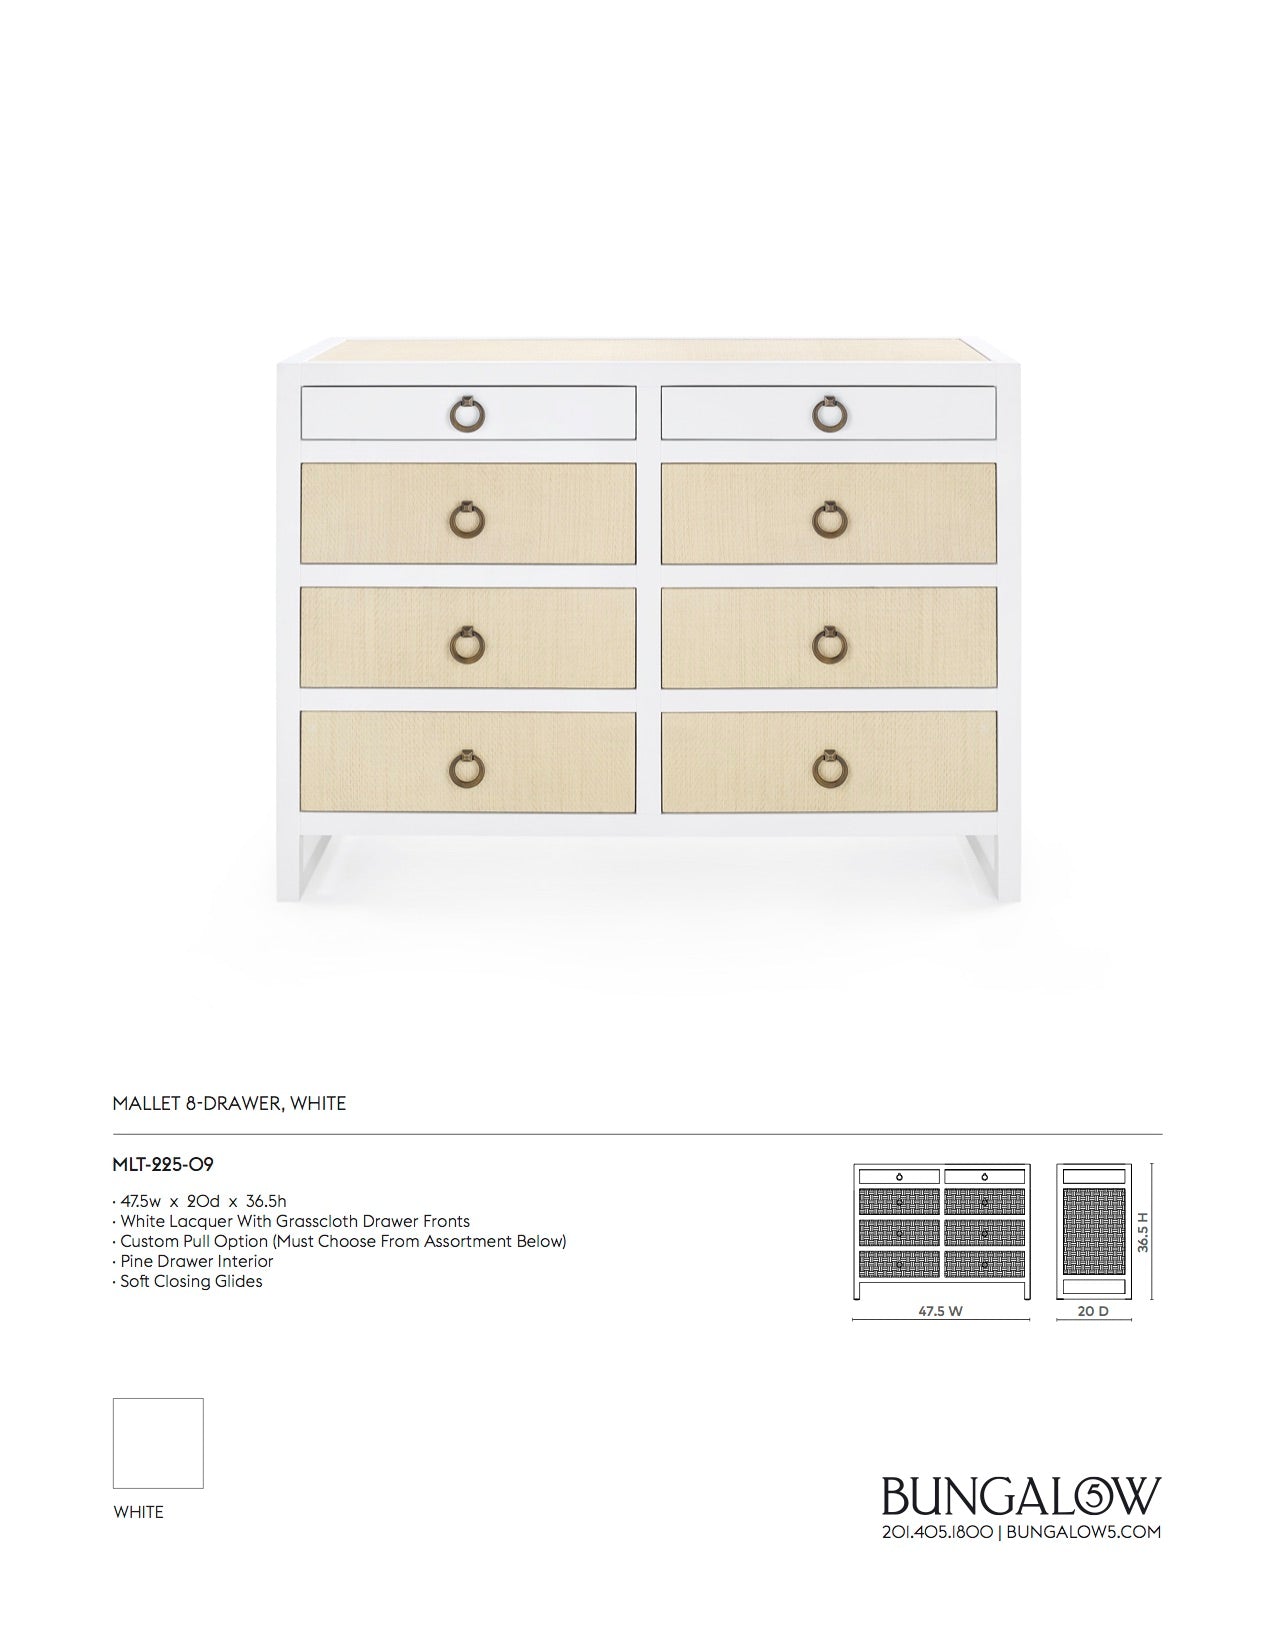 Bungalow 5 Mallet 8 Drawer Dresser Grasscloth and White Lacquer Tearsheet